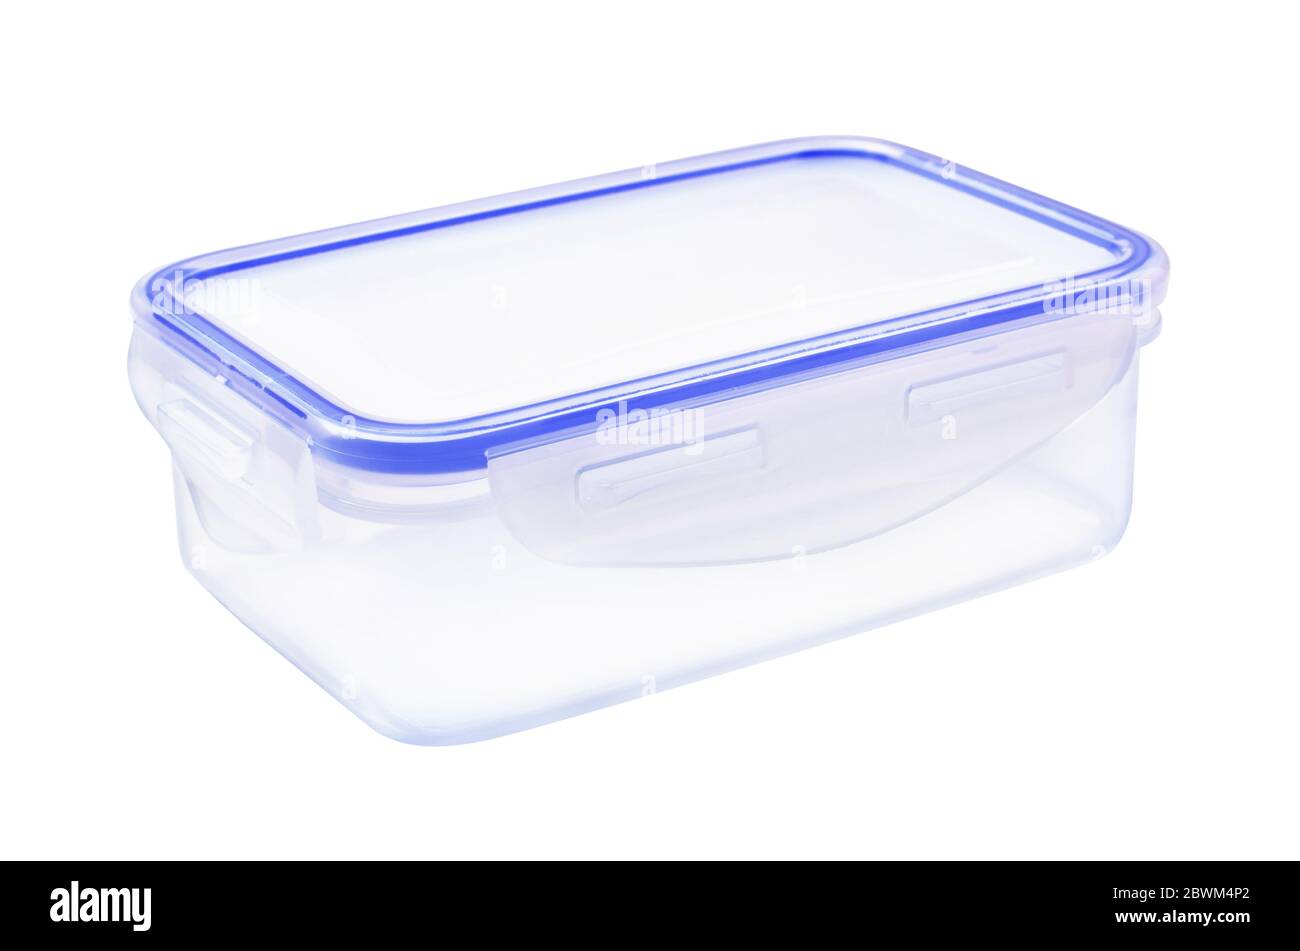 https://c8.alamy.com/comp/2BWM4P2/plastic-food-container-lunch-box-with-a-lid-isolated-on-white-background-2BWM4P2.jpg